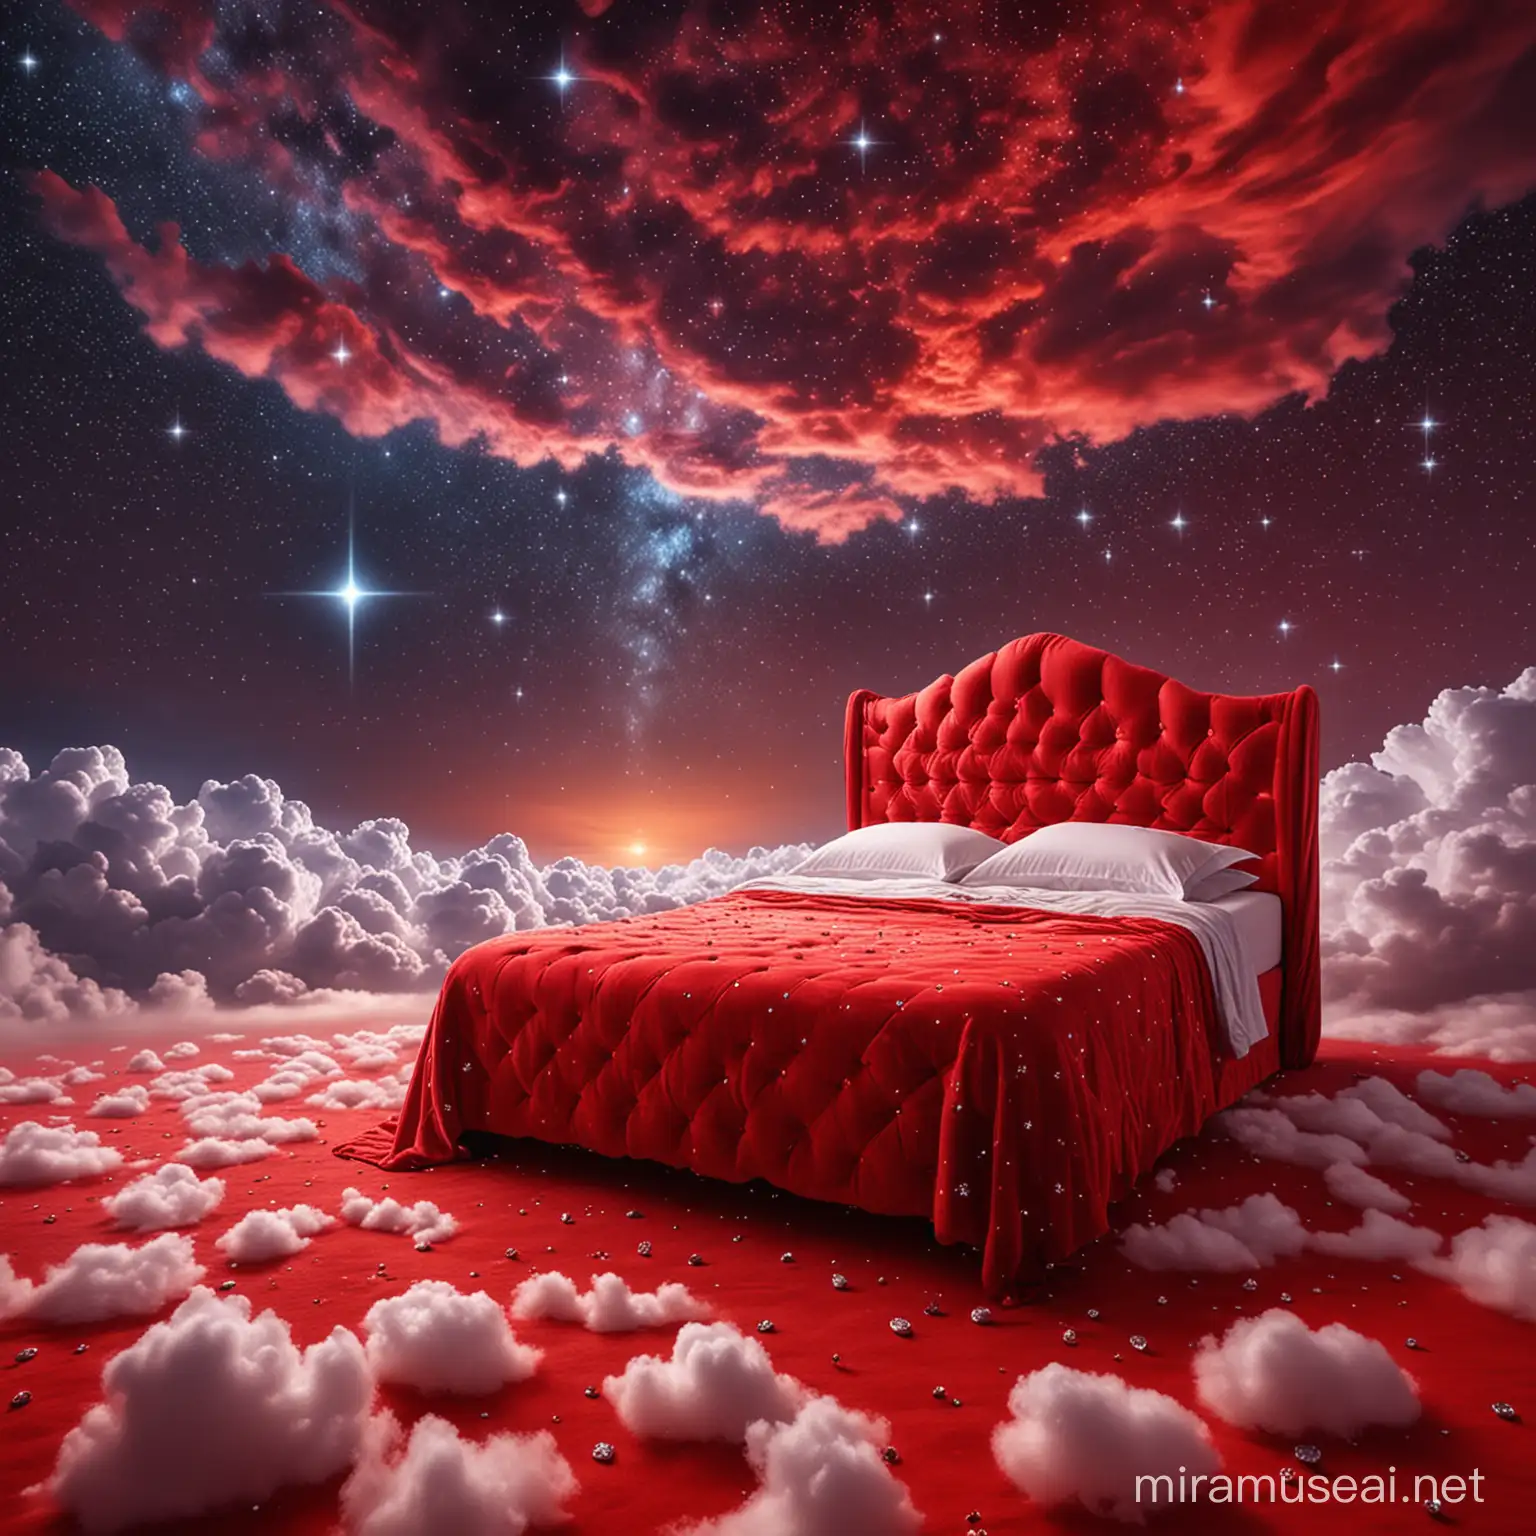 A beautiful, comfortable red bed covered all over with diamonds, among the stars in the sky with clouds